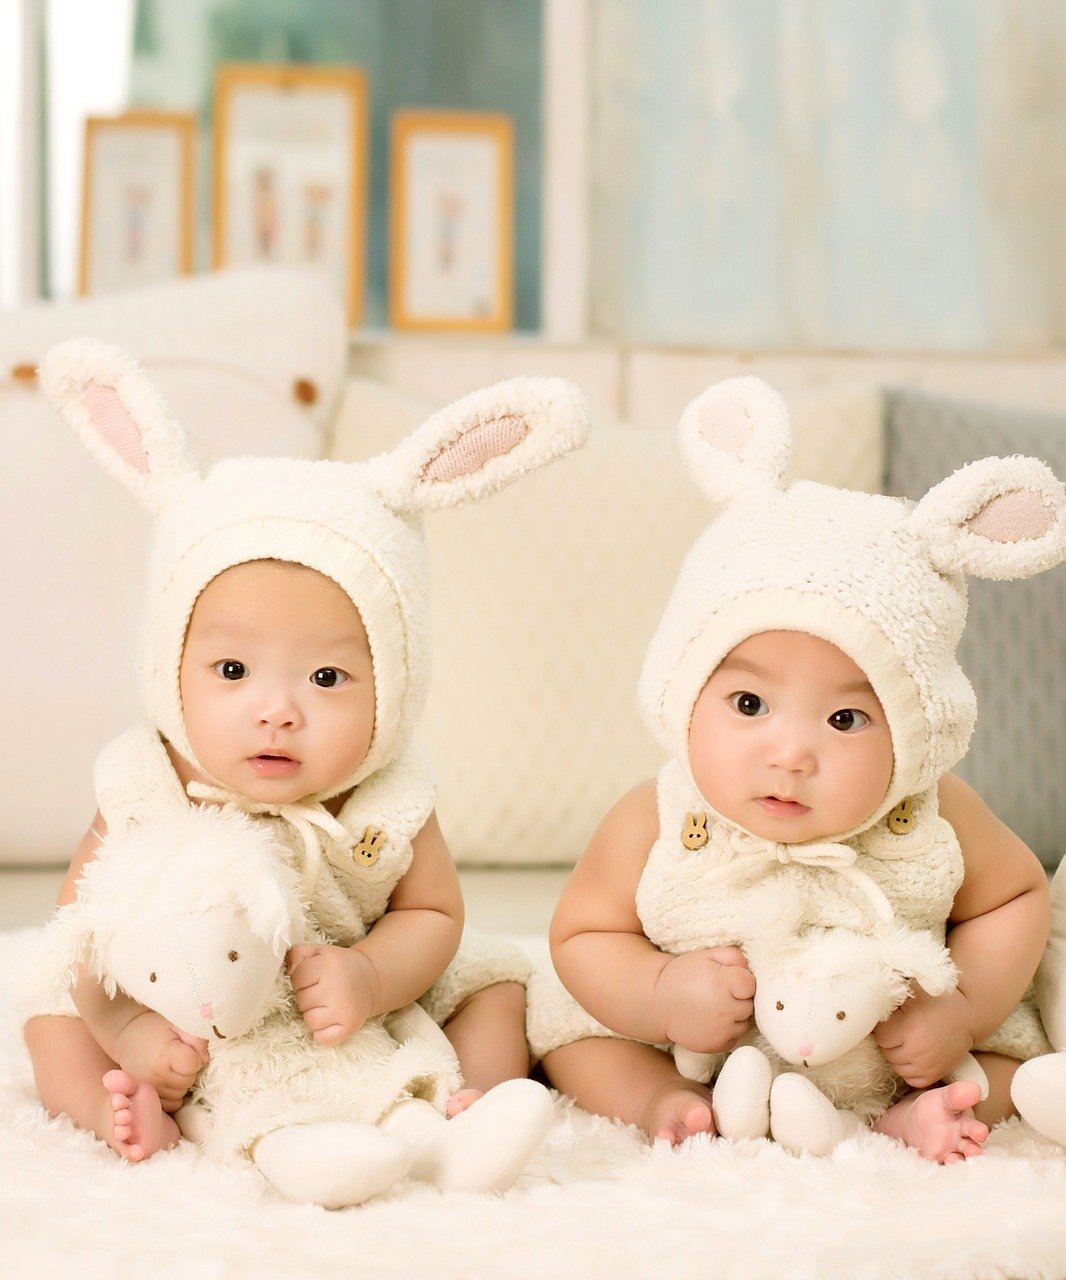 Two cute babies dressed in bunny costumes while holding stuffed animals | Photo: Pixabay/1035352